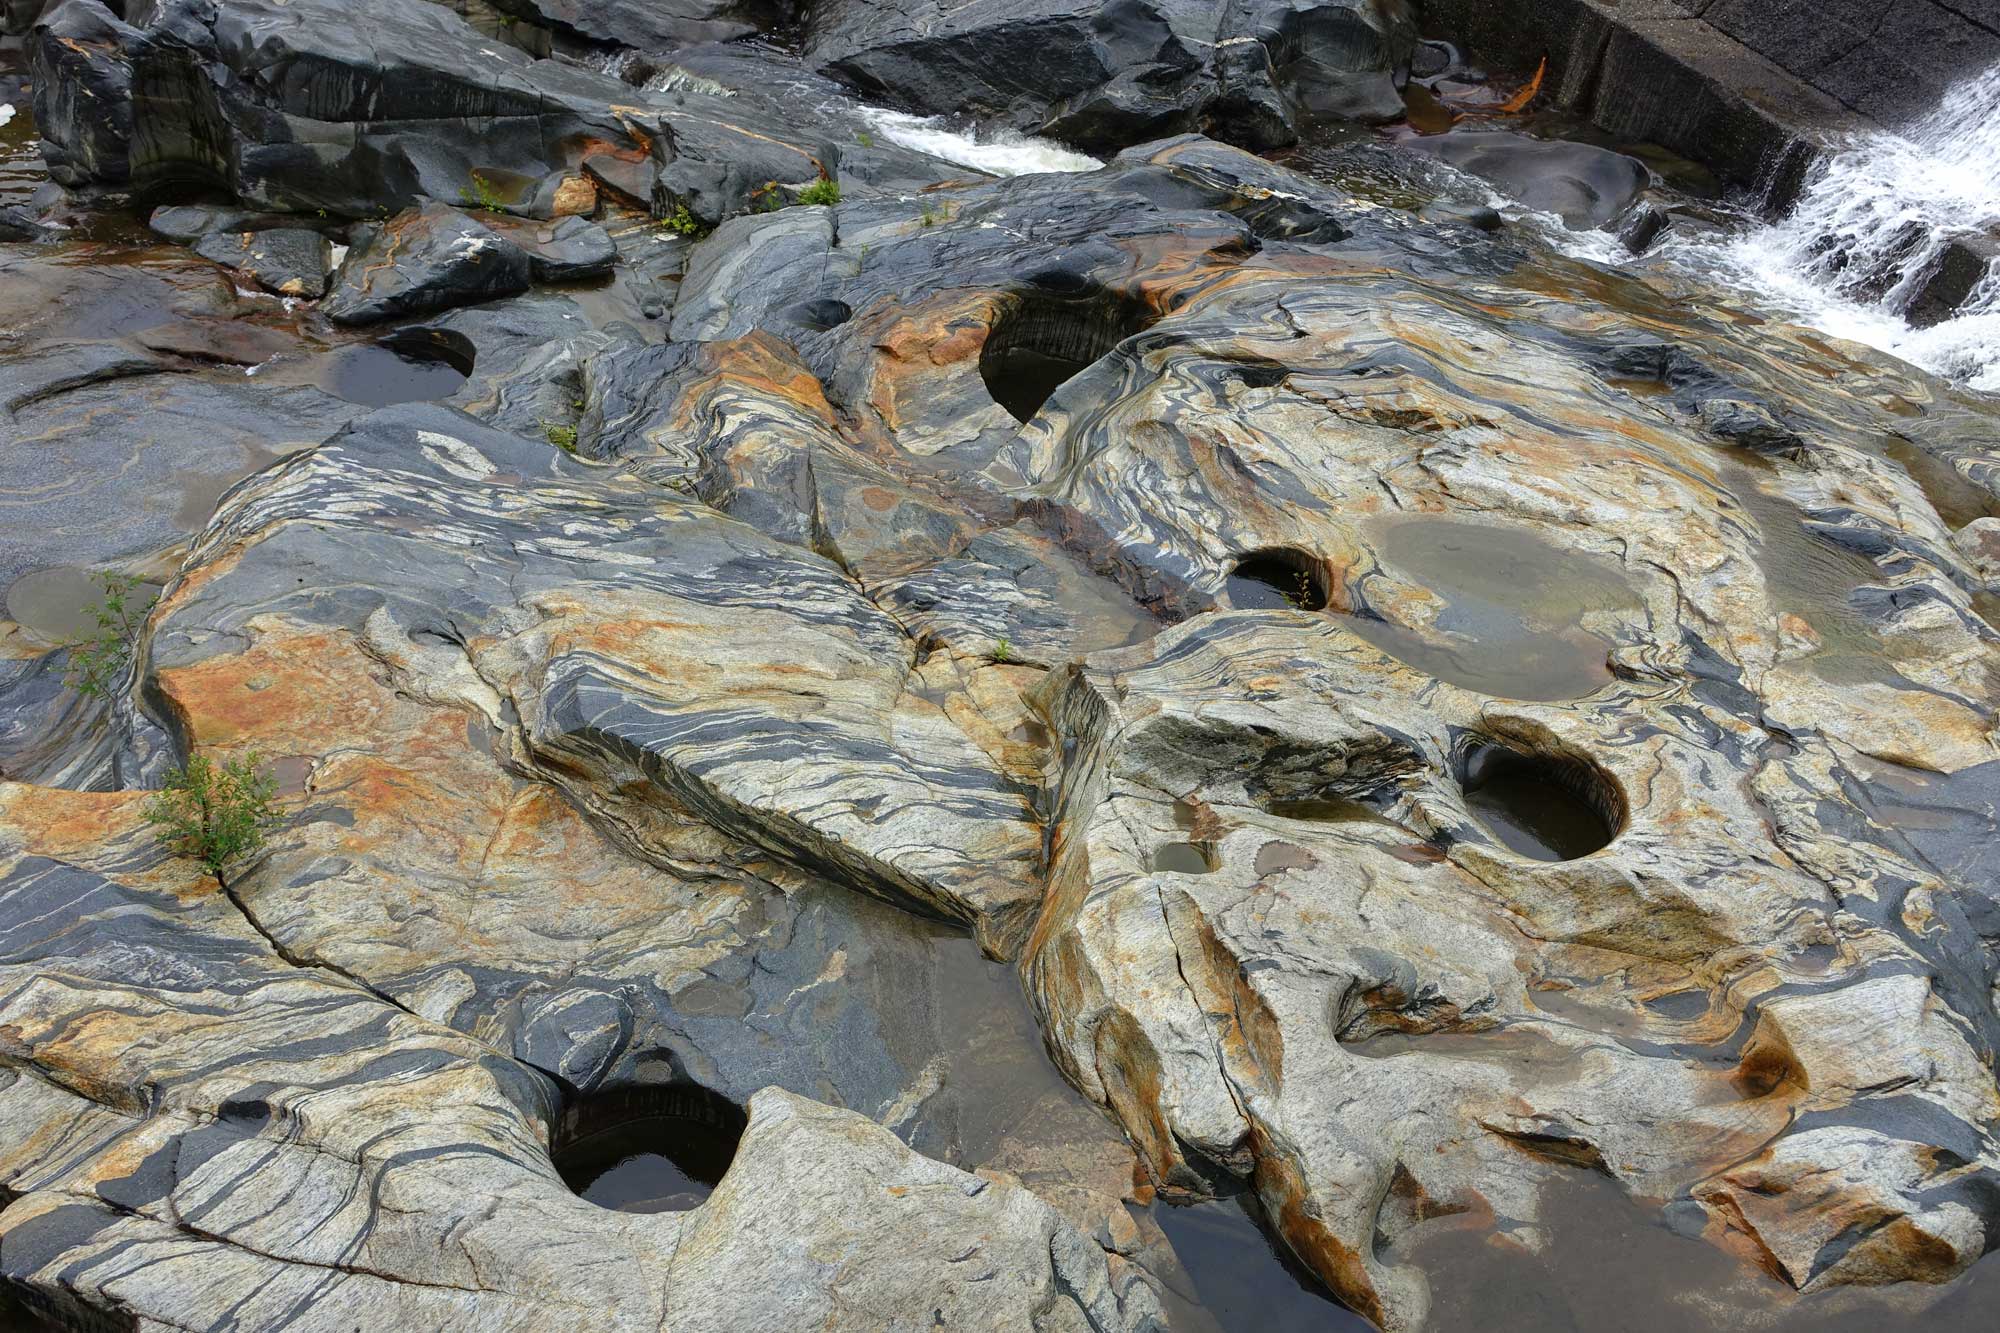 Photograph of potholes at Shelburne Falls, Massachusetts. The photo shows beige rocks with swirling gray stripes and areas stained orange. The rock has a number of potholes, or small circular depressions, in it. Water can be seen flowing over a barrier in the upper right corner of the image.